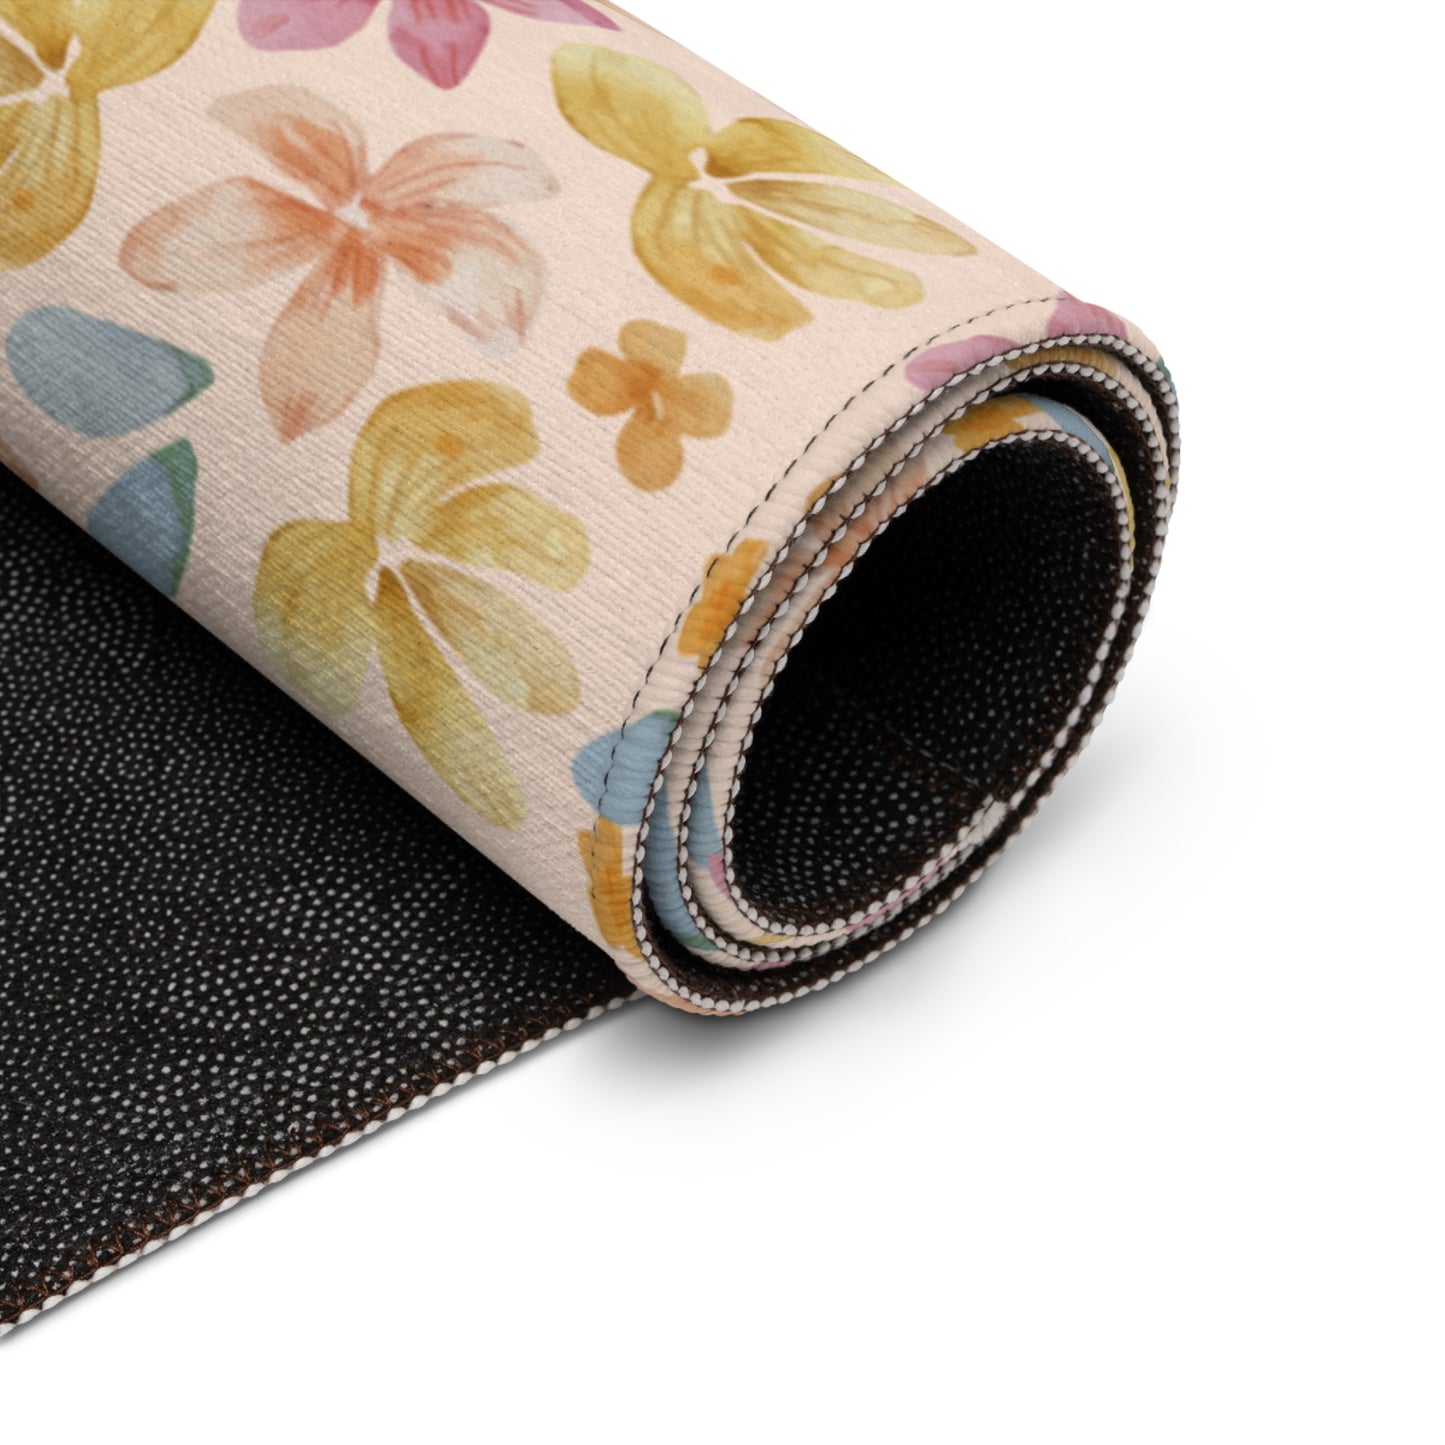 Niccie Floral Pattern Picnic Rug: Durable Outdoor Mat & Picnic